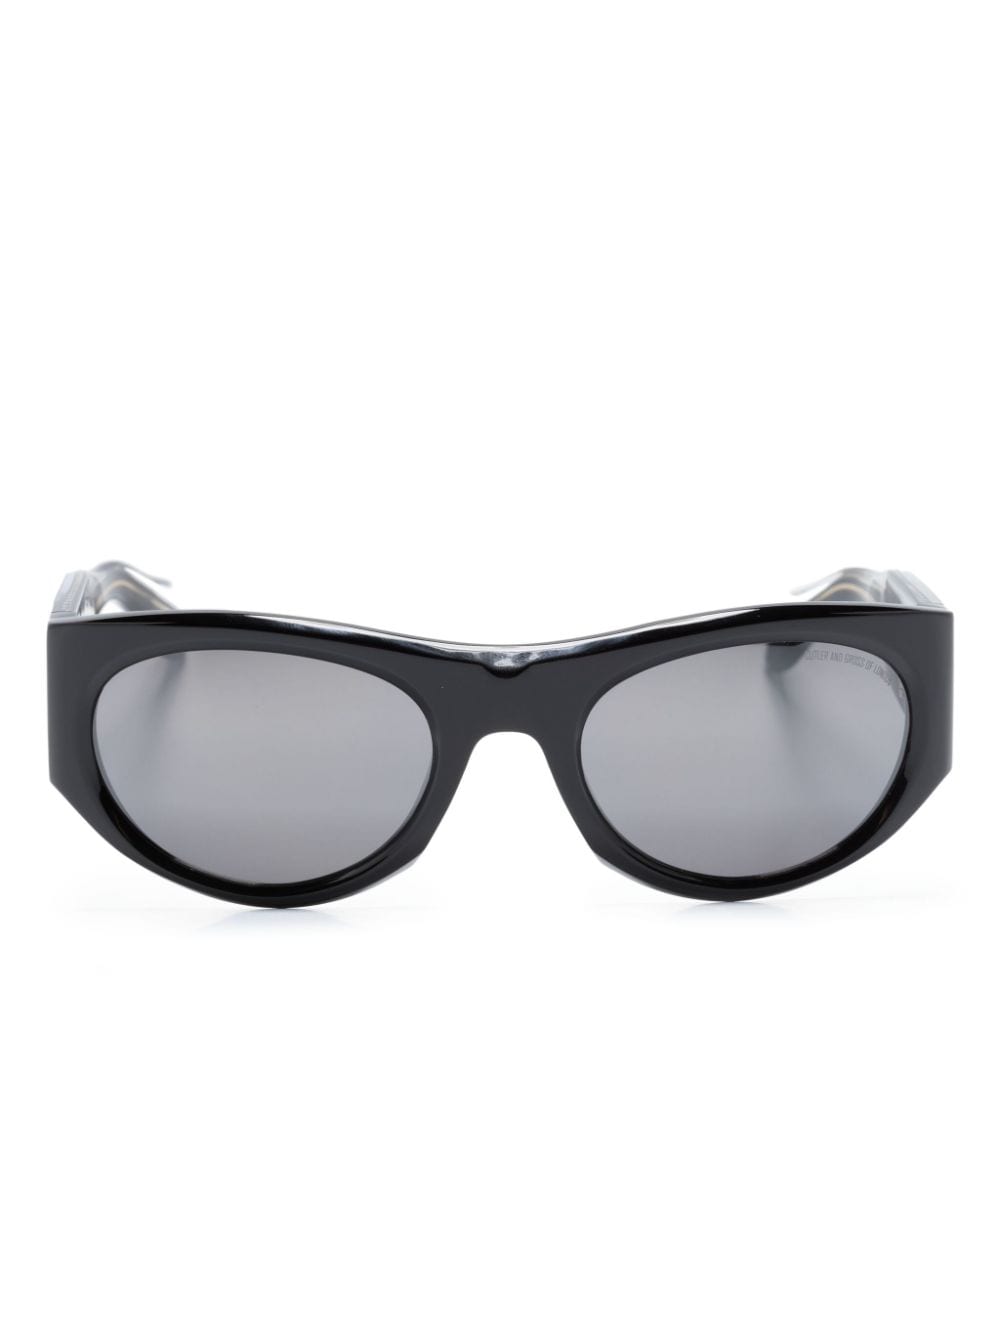 Cutler And Gross 9276 Round-frame Sunglasses In Black